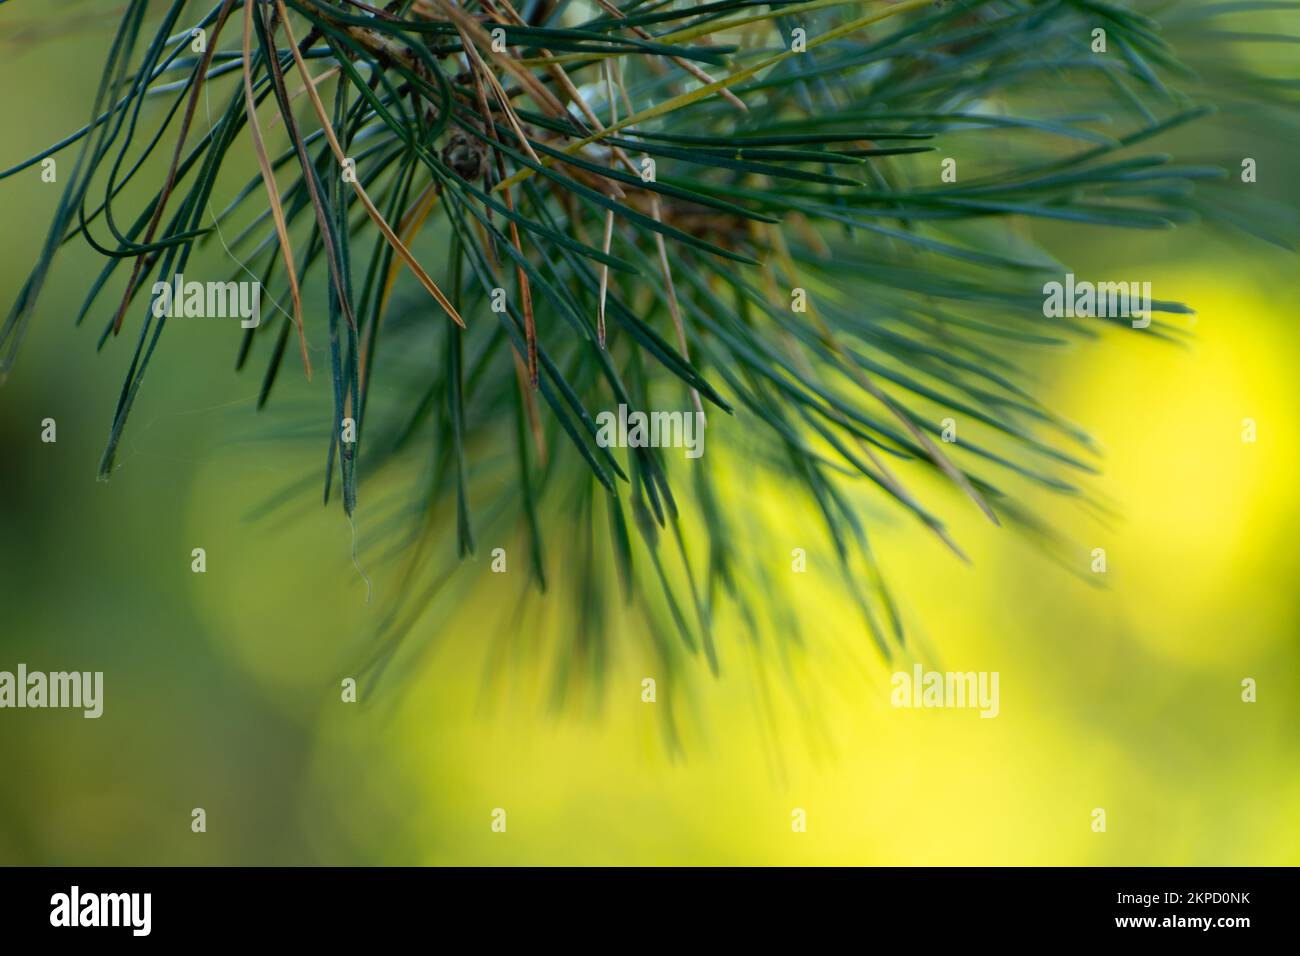 Abstract sprig of green spruce on a sunlit background Stock Photo